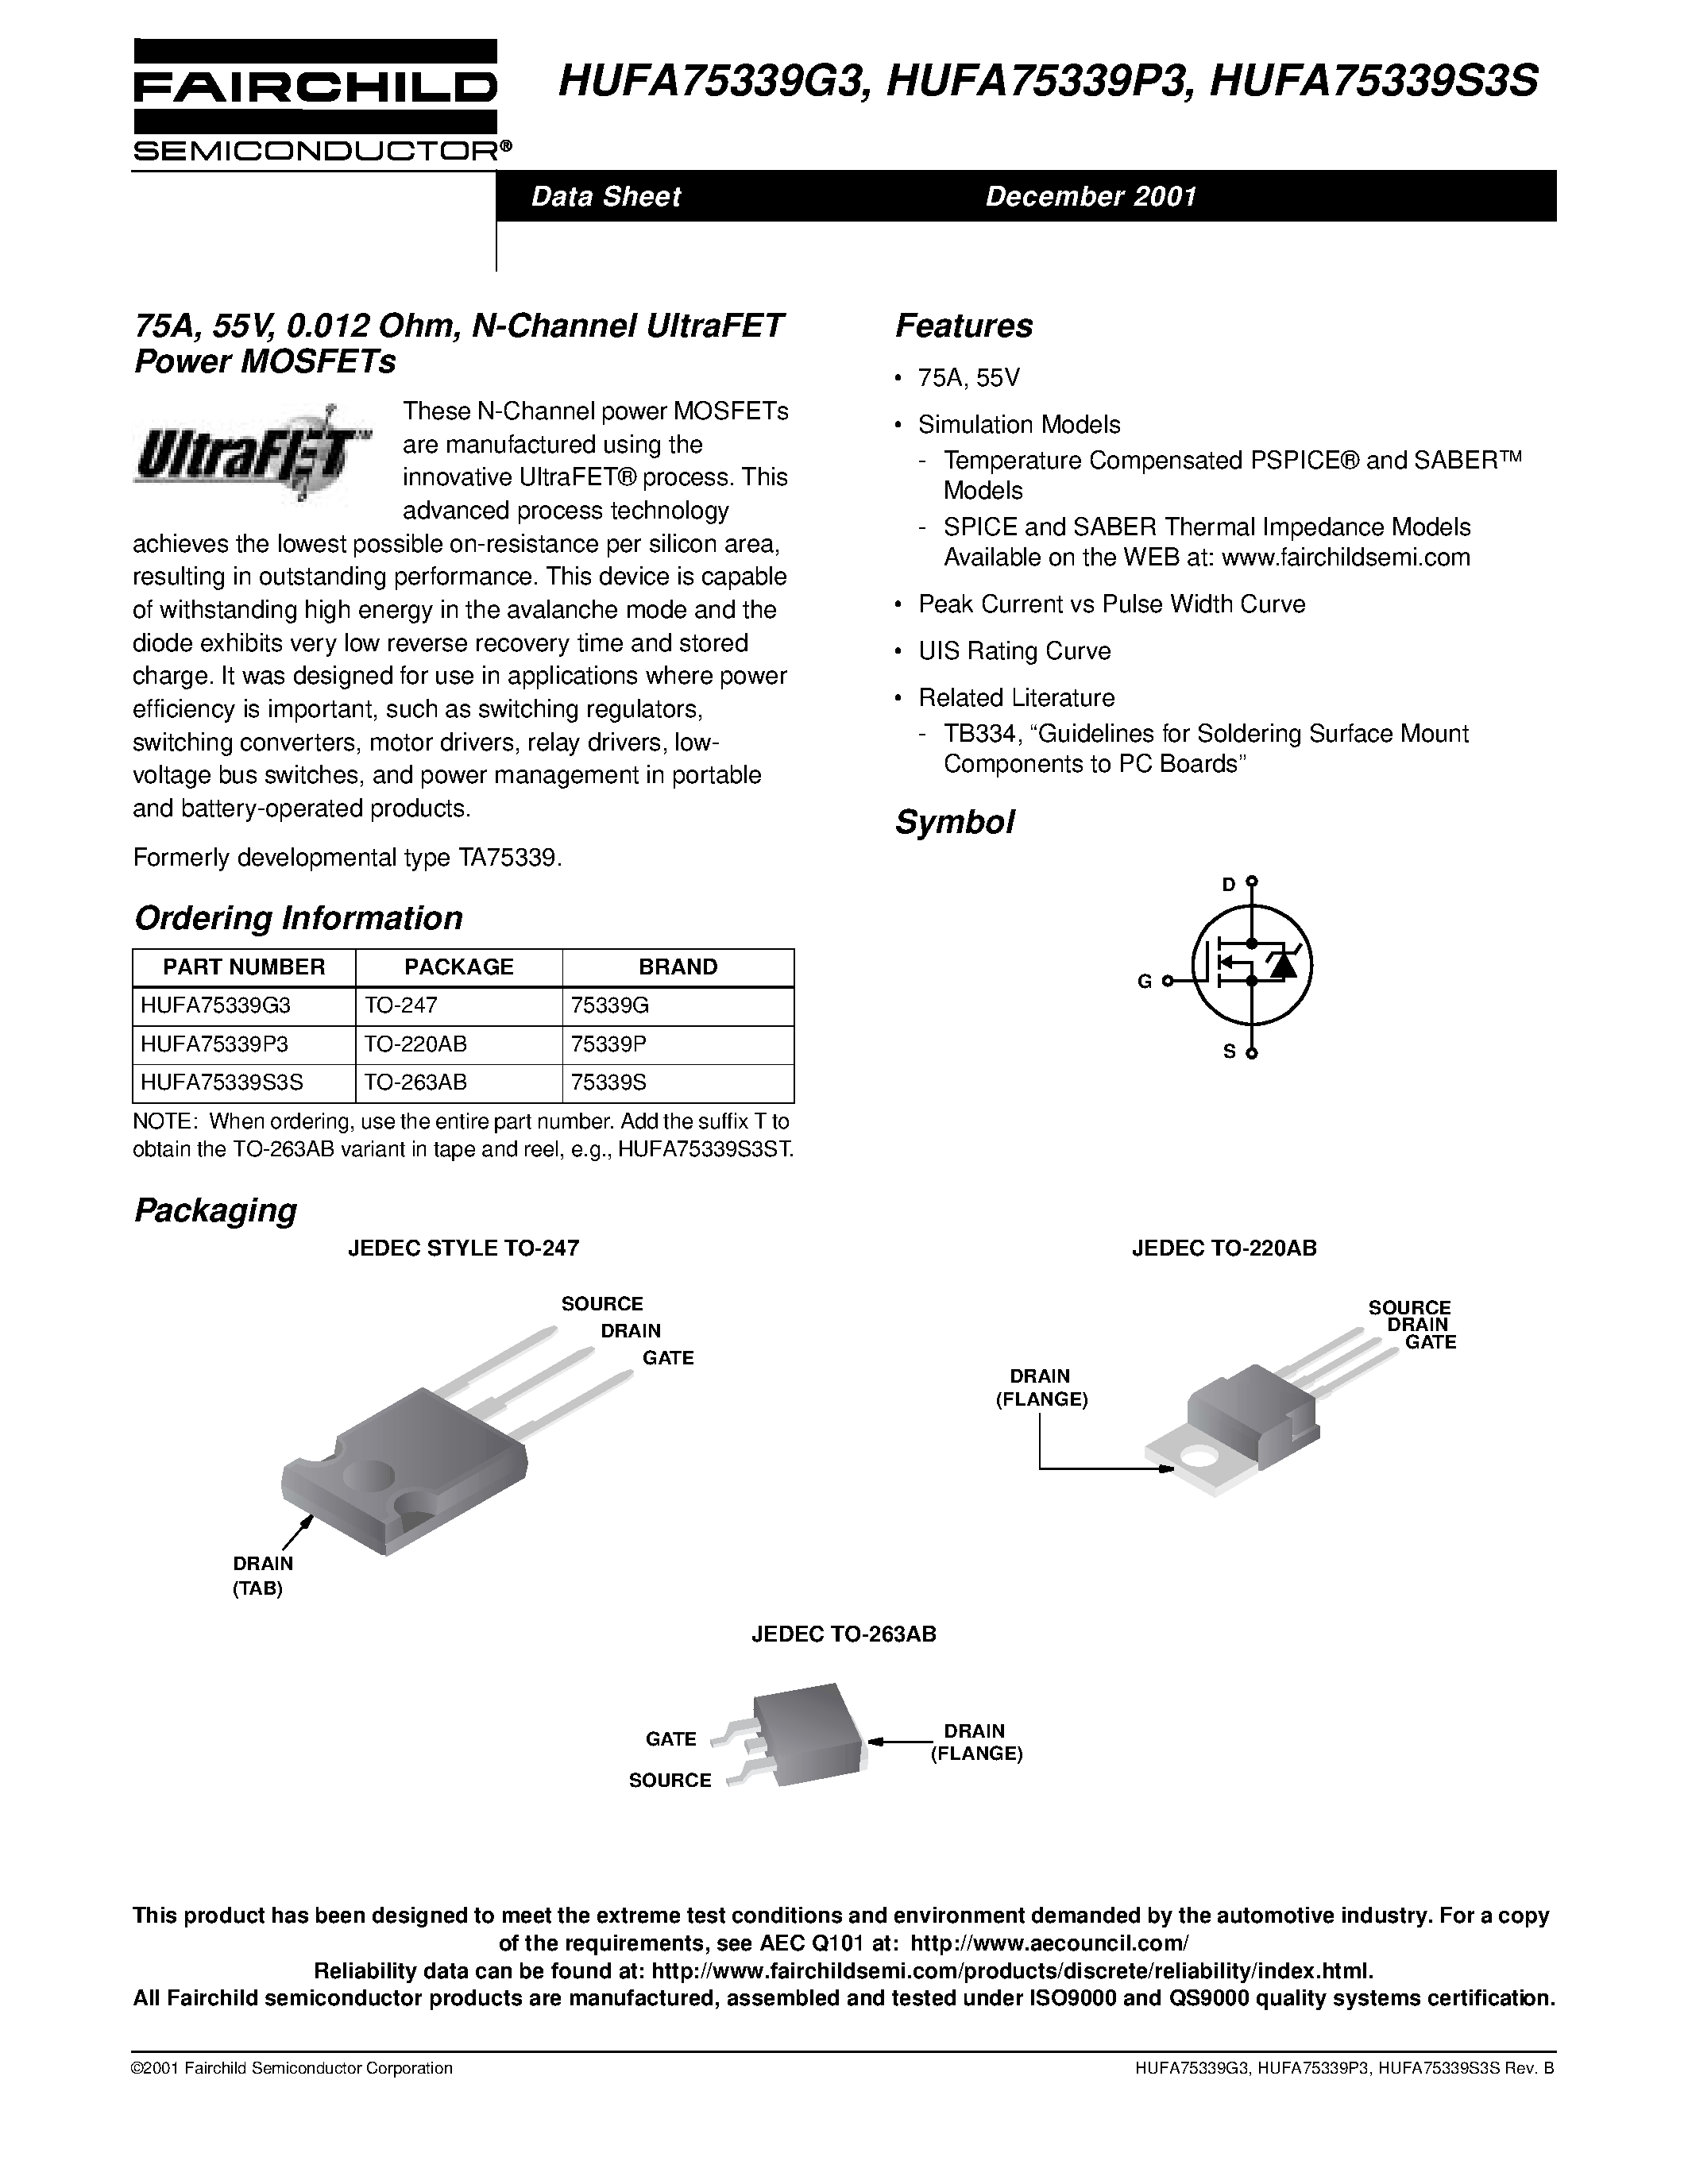 Даташит HUFA75332S3S - 60A/ 55V/ 0.019 Ohm/ N-Channel UltraFET Power MOSFETs страница 1